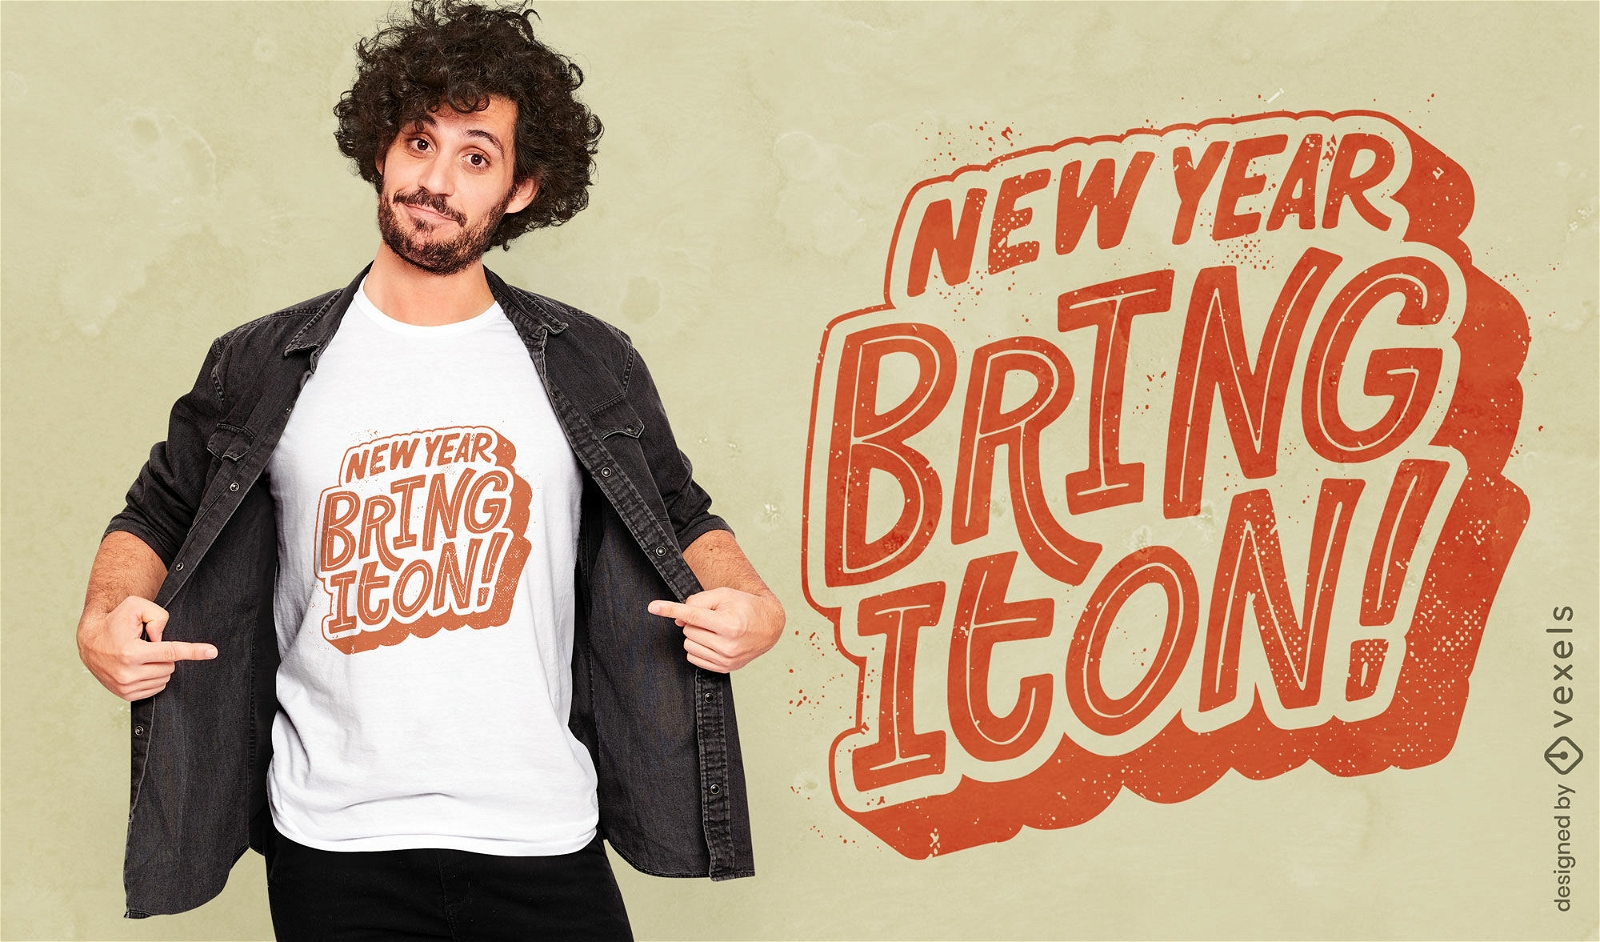 New year holiday bring it on t-shirt design